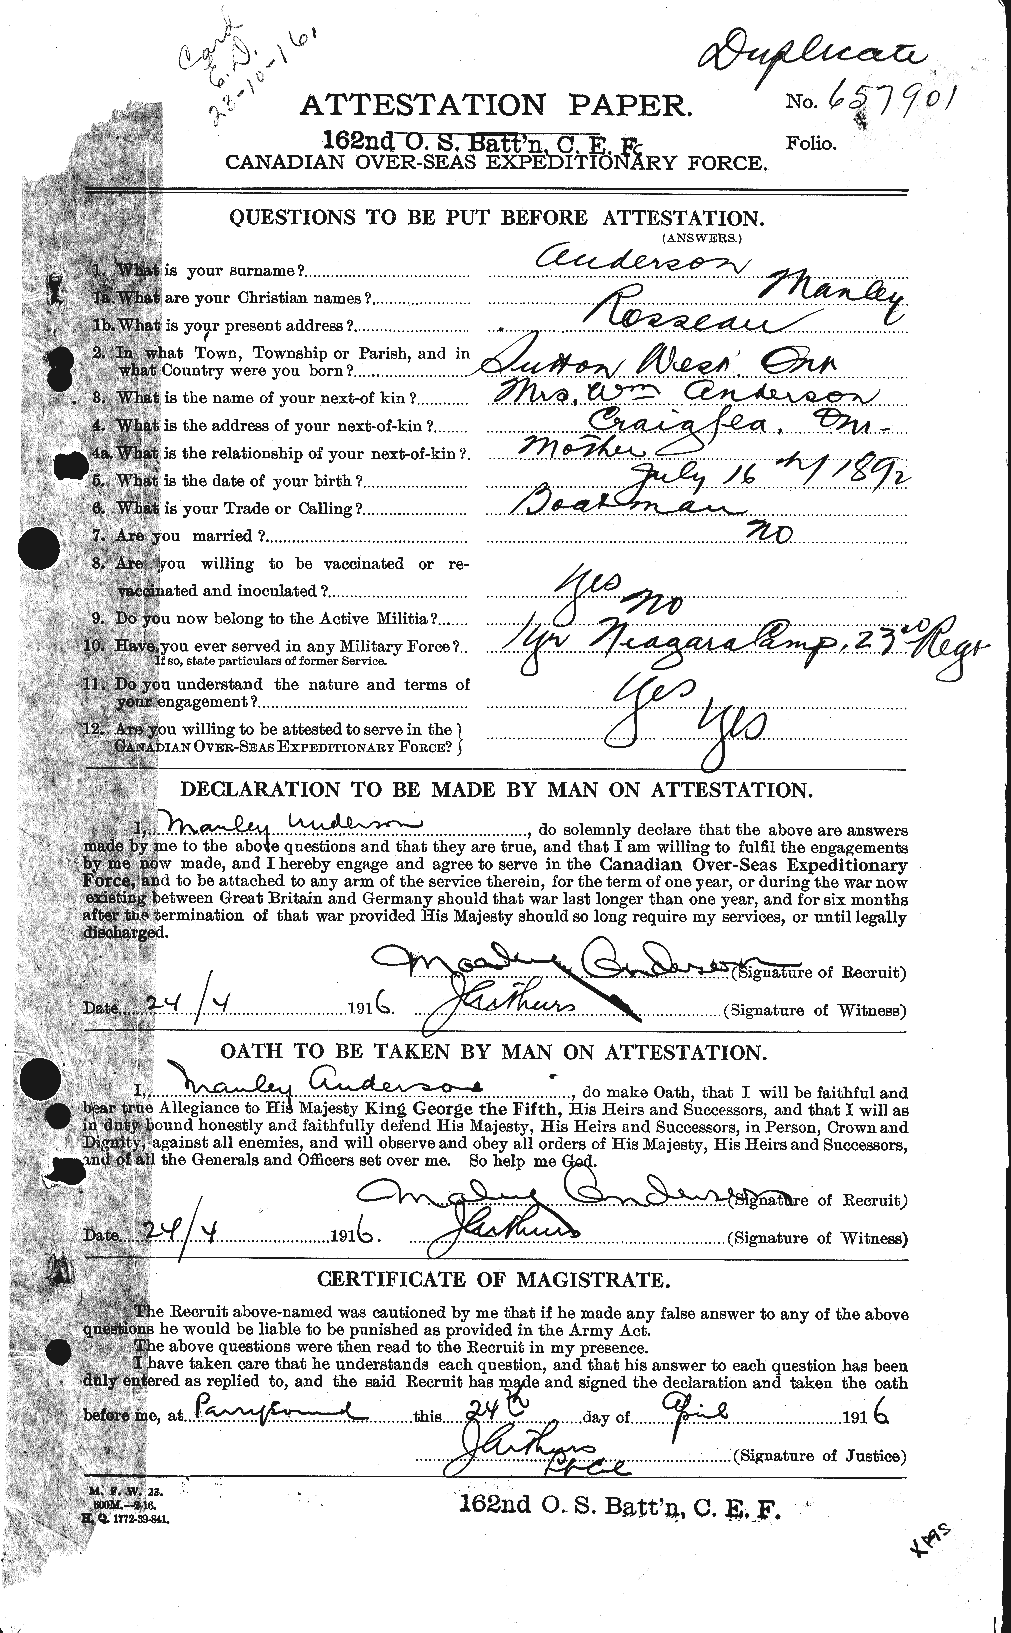 Personnel Records of the First World War - CEF 207484a